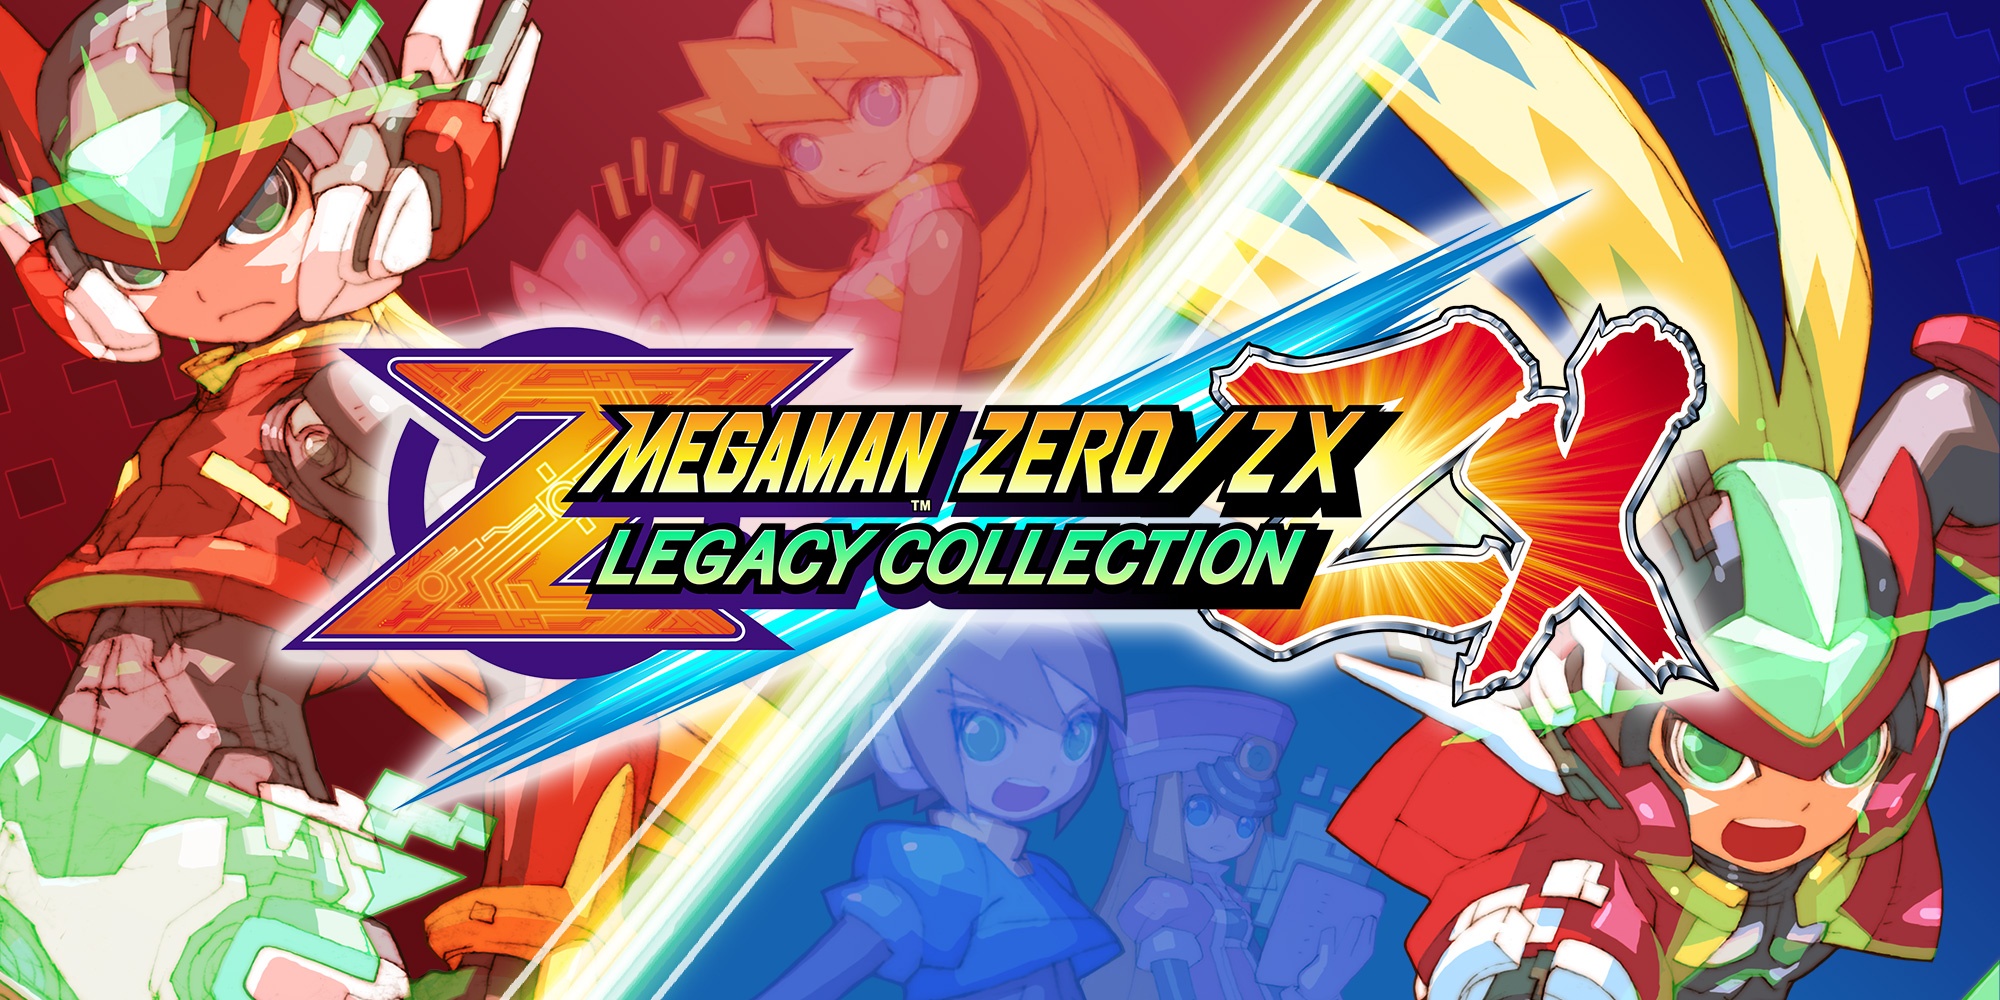 Mega Man Zero Zx Legacy Collection Review Zero Or Hero There aren't many resources that. thumb culture